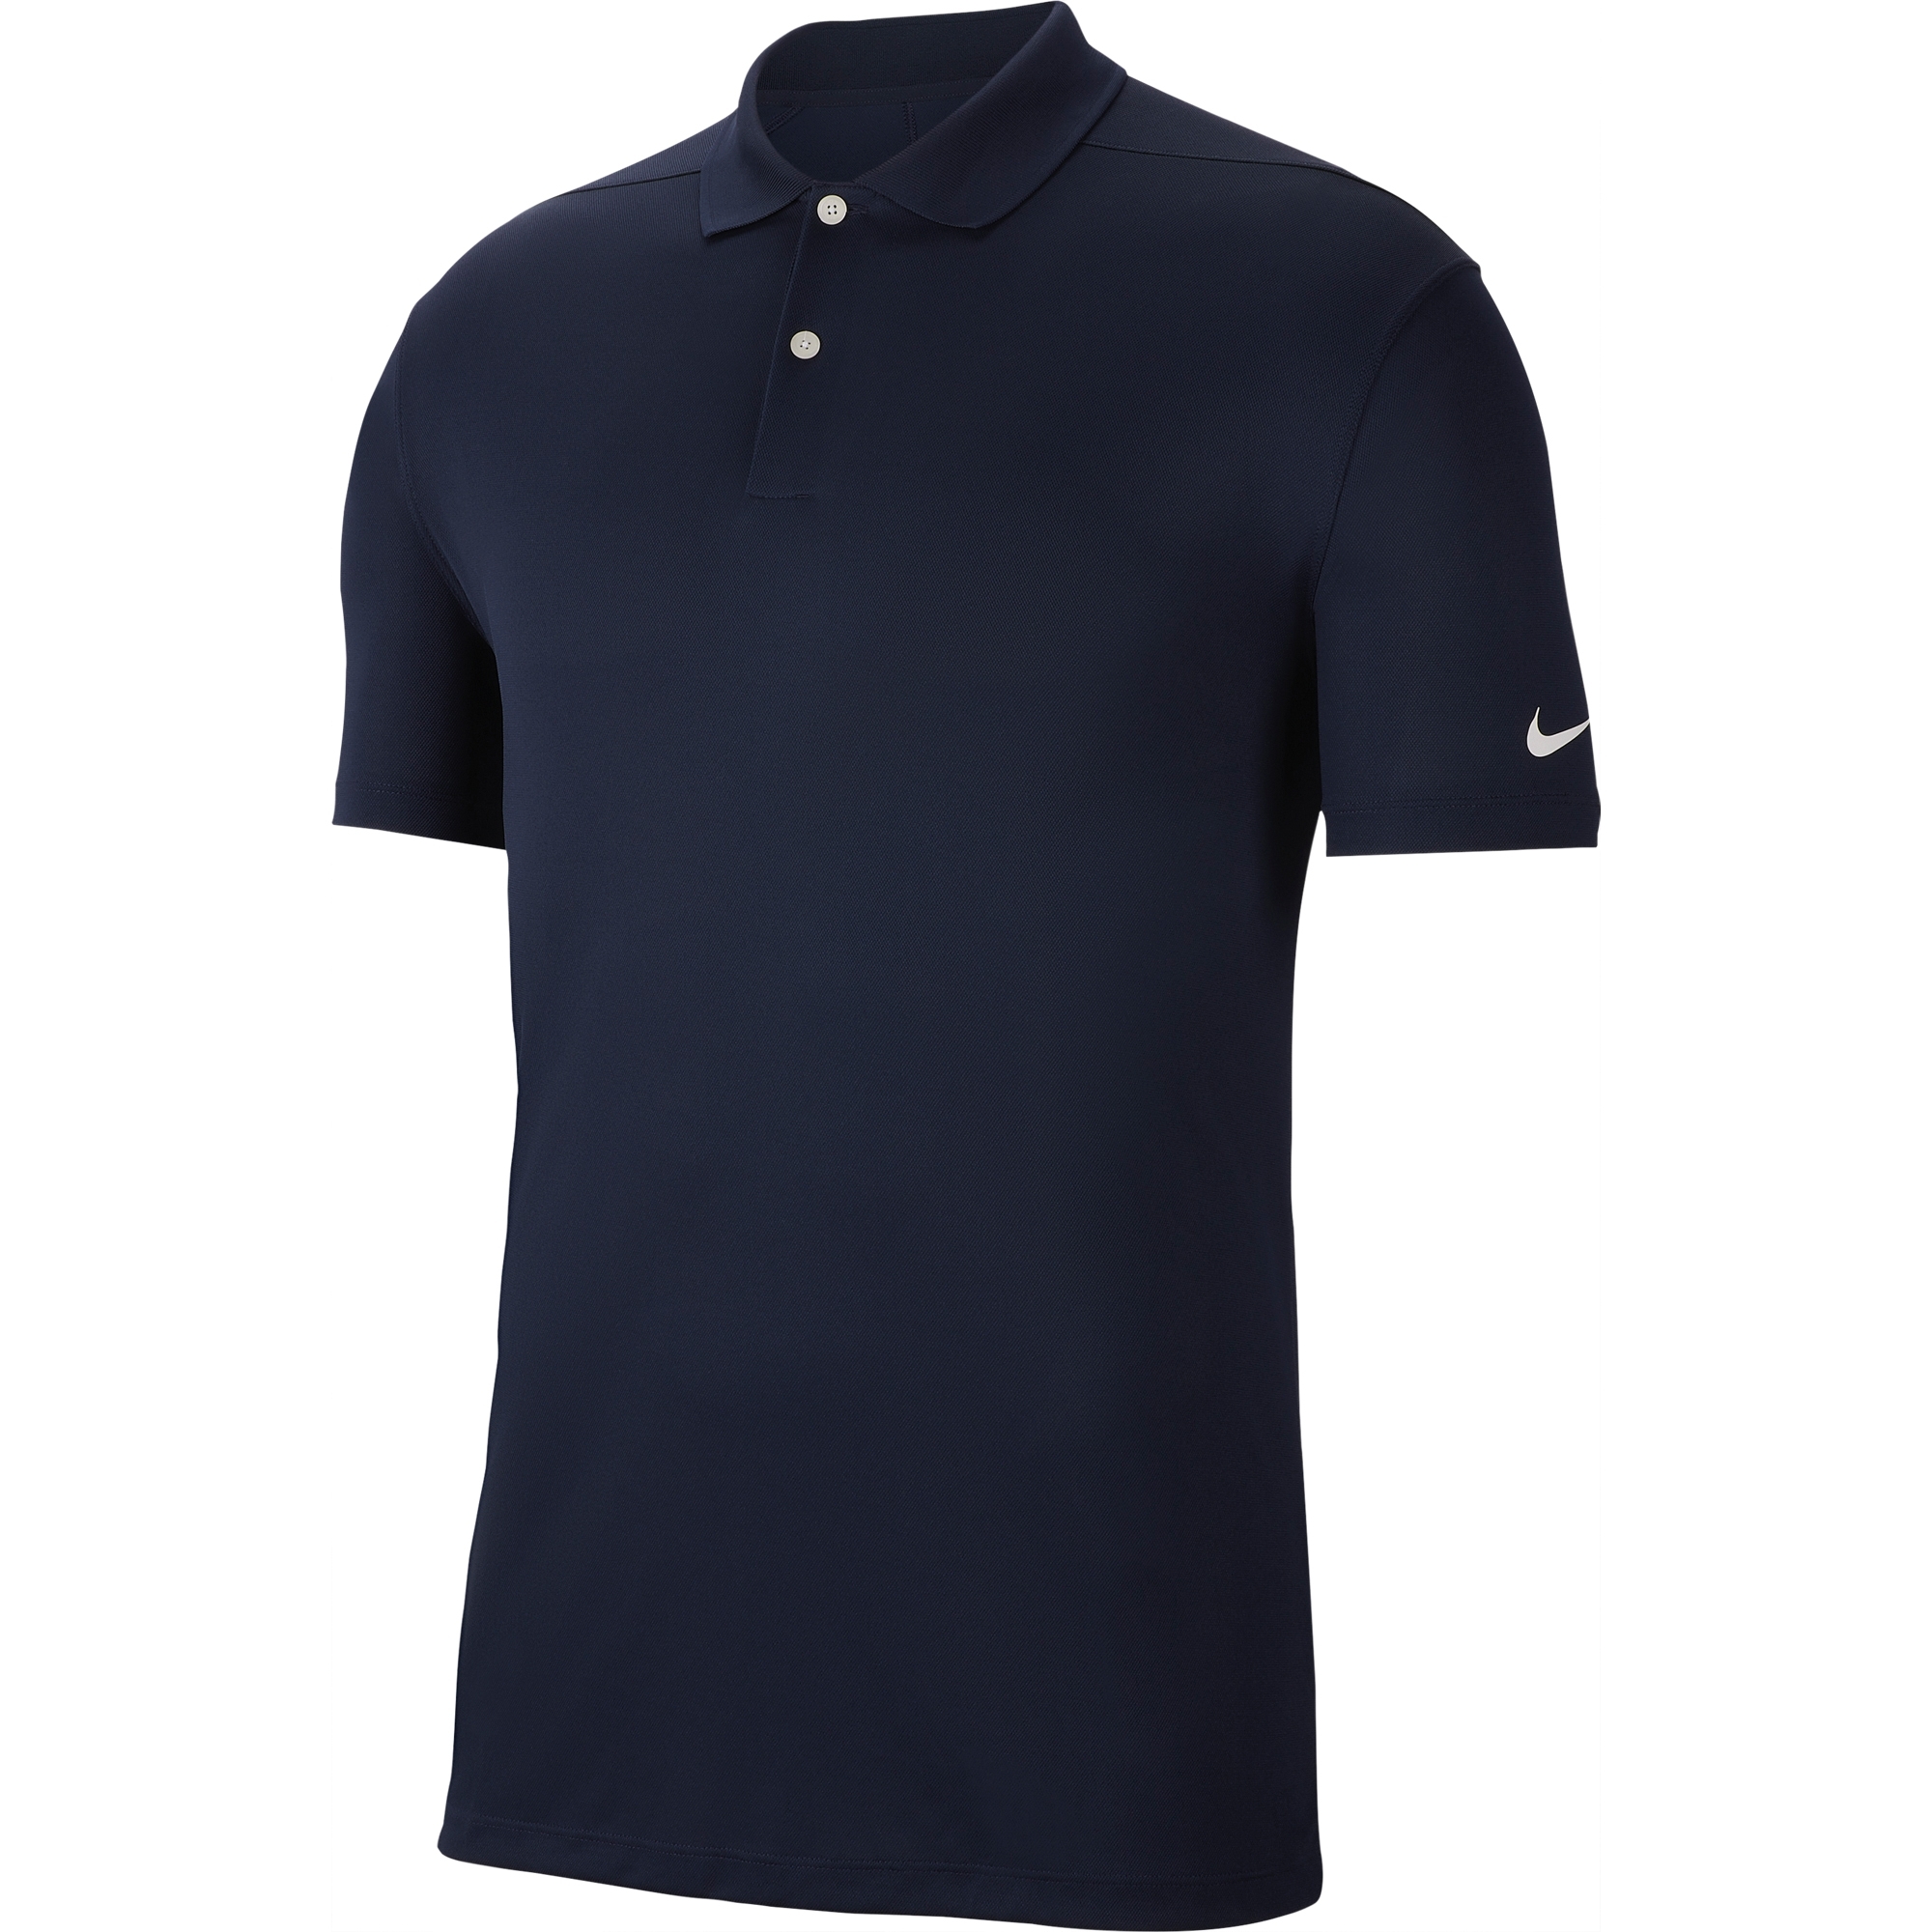 Nike Mens Dry Fit Solid Victory Golf Polo Shirt L- Chest 41-44